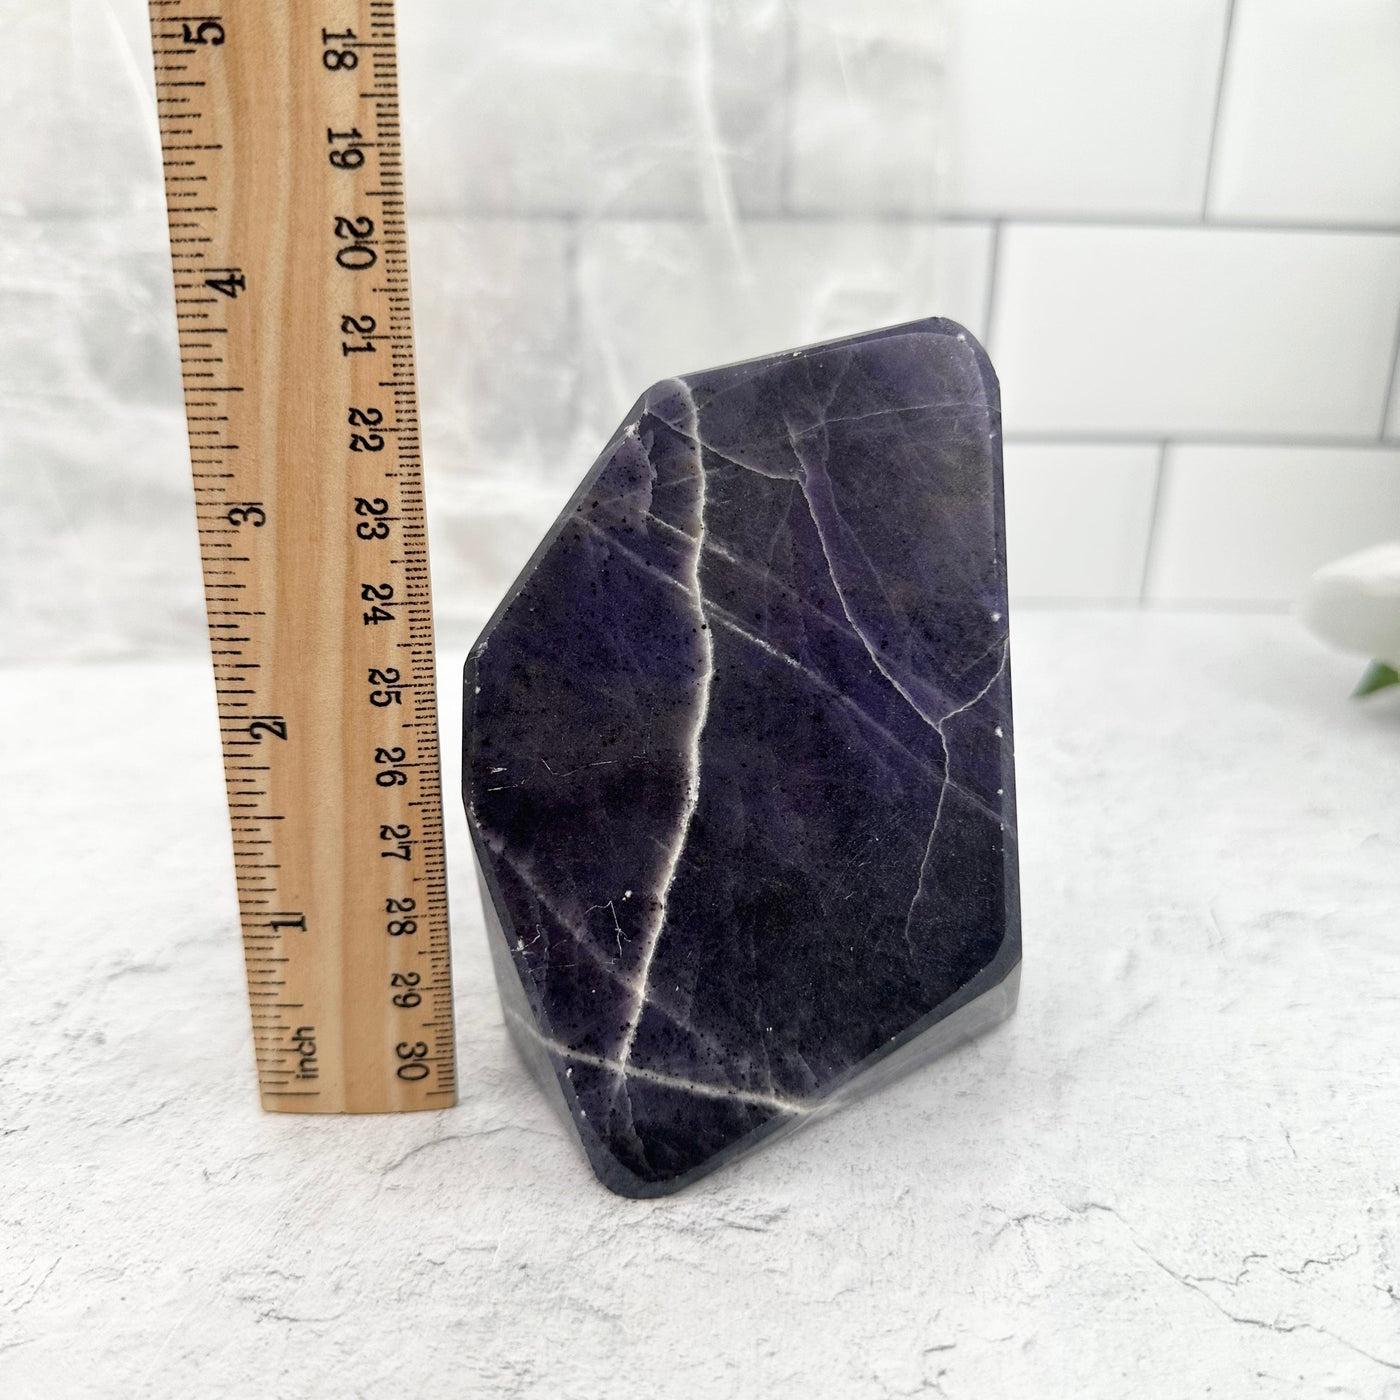  Purpurite Polished Stone - OOAK - with ruler for size reference 